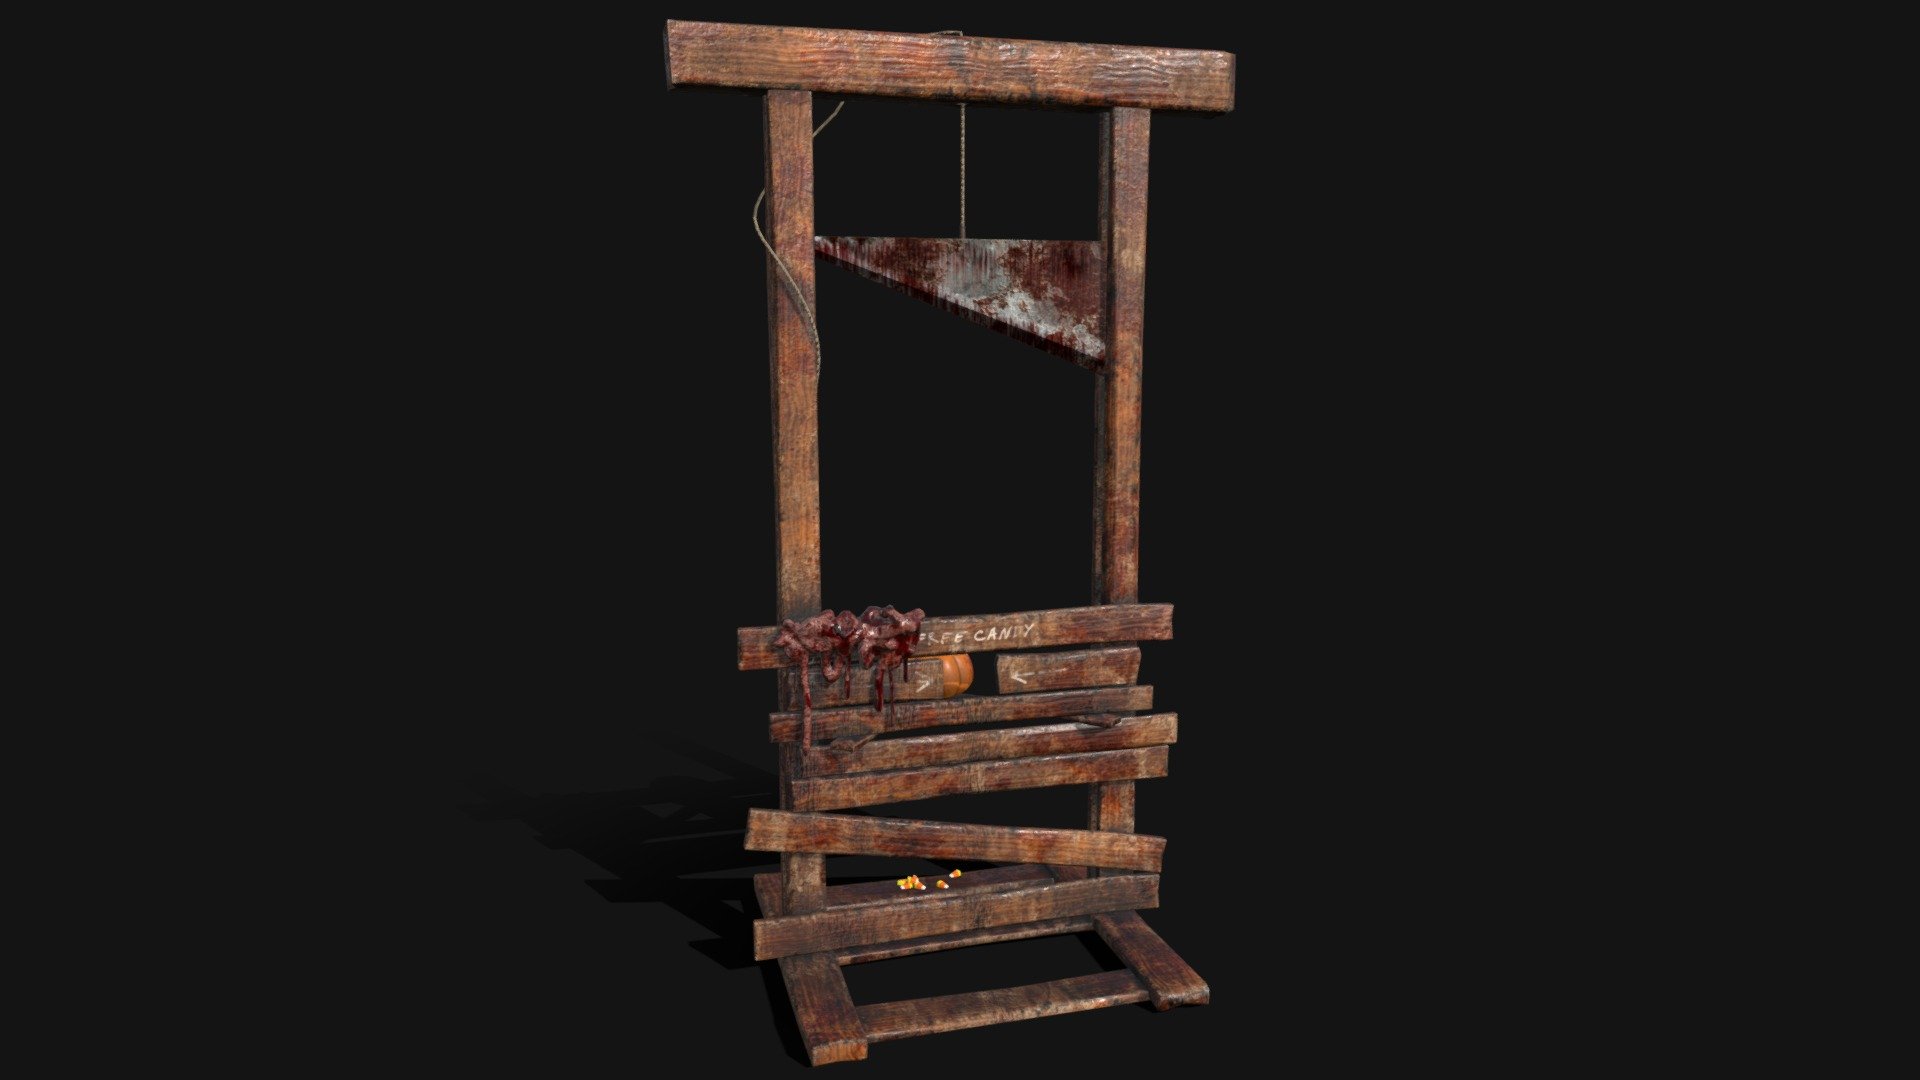 Bloody Halloween Guillotine 3D Model. This model contains the Bloody Halloween Guillotine itself 

All modeled in Maya, textured with Substance Painter.

The model was built to scale and is UV unwrapped properly. Contains a 4K and 2K texture set.  

⦁   9156 tris. 

⦁   Contains: .FBX .OBJ and .DAE

⦁   Model has clean topology. No Ngons.

⦁   Built to scale

⦁   Unwrapped UV Map

⦁   4K Texture set

⦁   High quality details

⦁   Based on real life references

⦁   Renders done in Marmoset Toolbag

Polycount: 

Verts 4812

Edges 10536 

Faces 5847

Tris 9156

If you have any questions please feel free to ask me 3d model